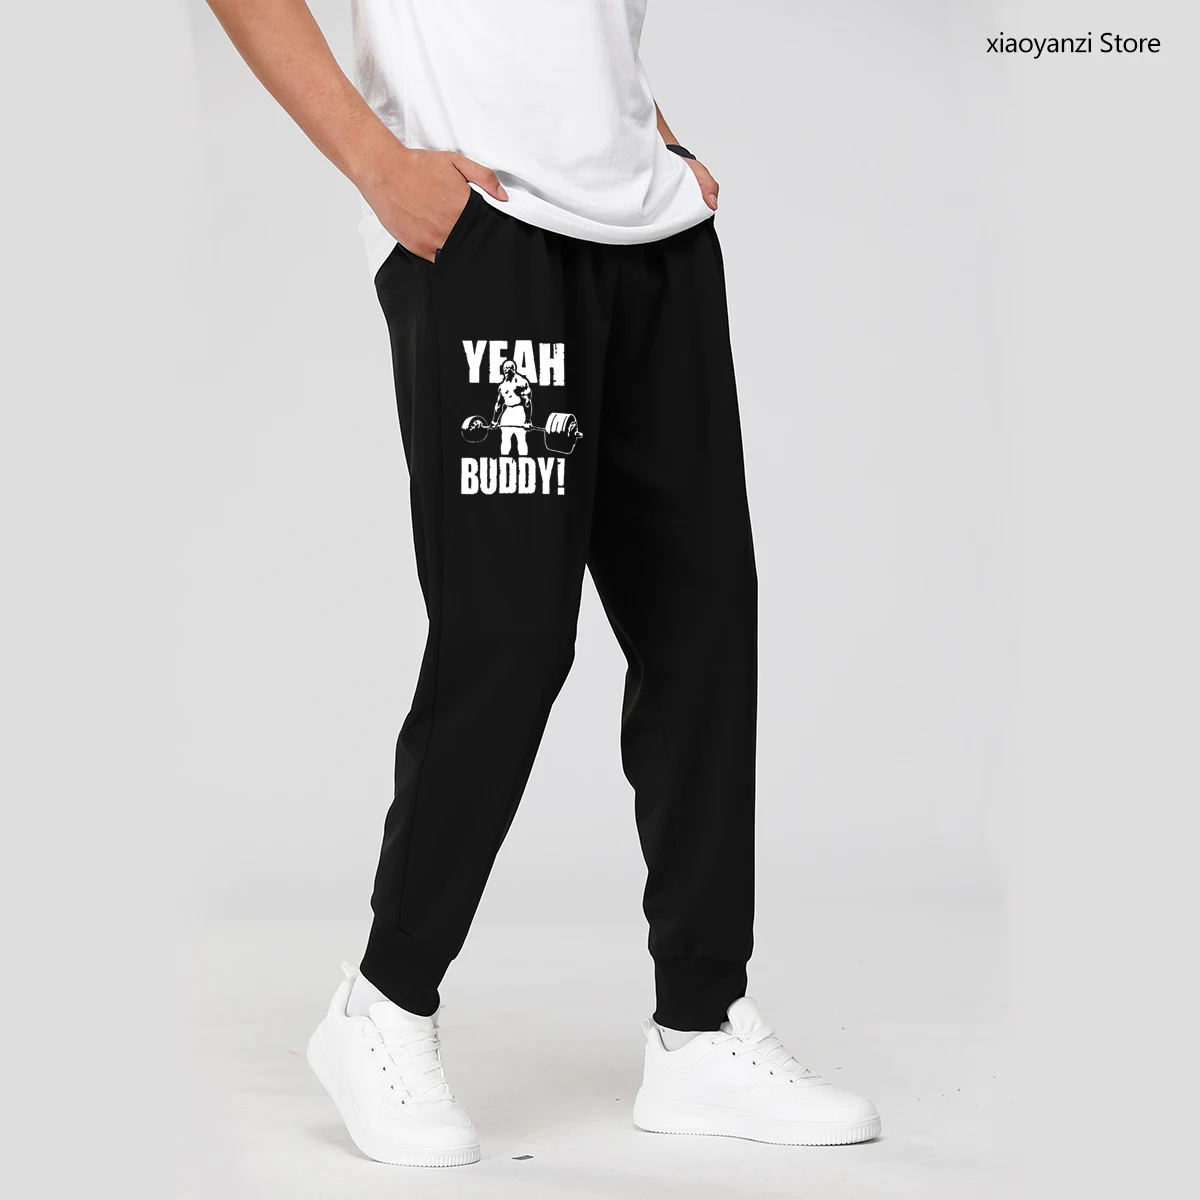 

Male Yeah Buddy Ronnie Coleman Body Building Casual Sweatpants clothing Men Sports Fitness Long Pants Print Trousers OU-55-9-3